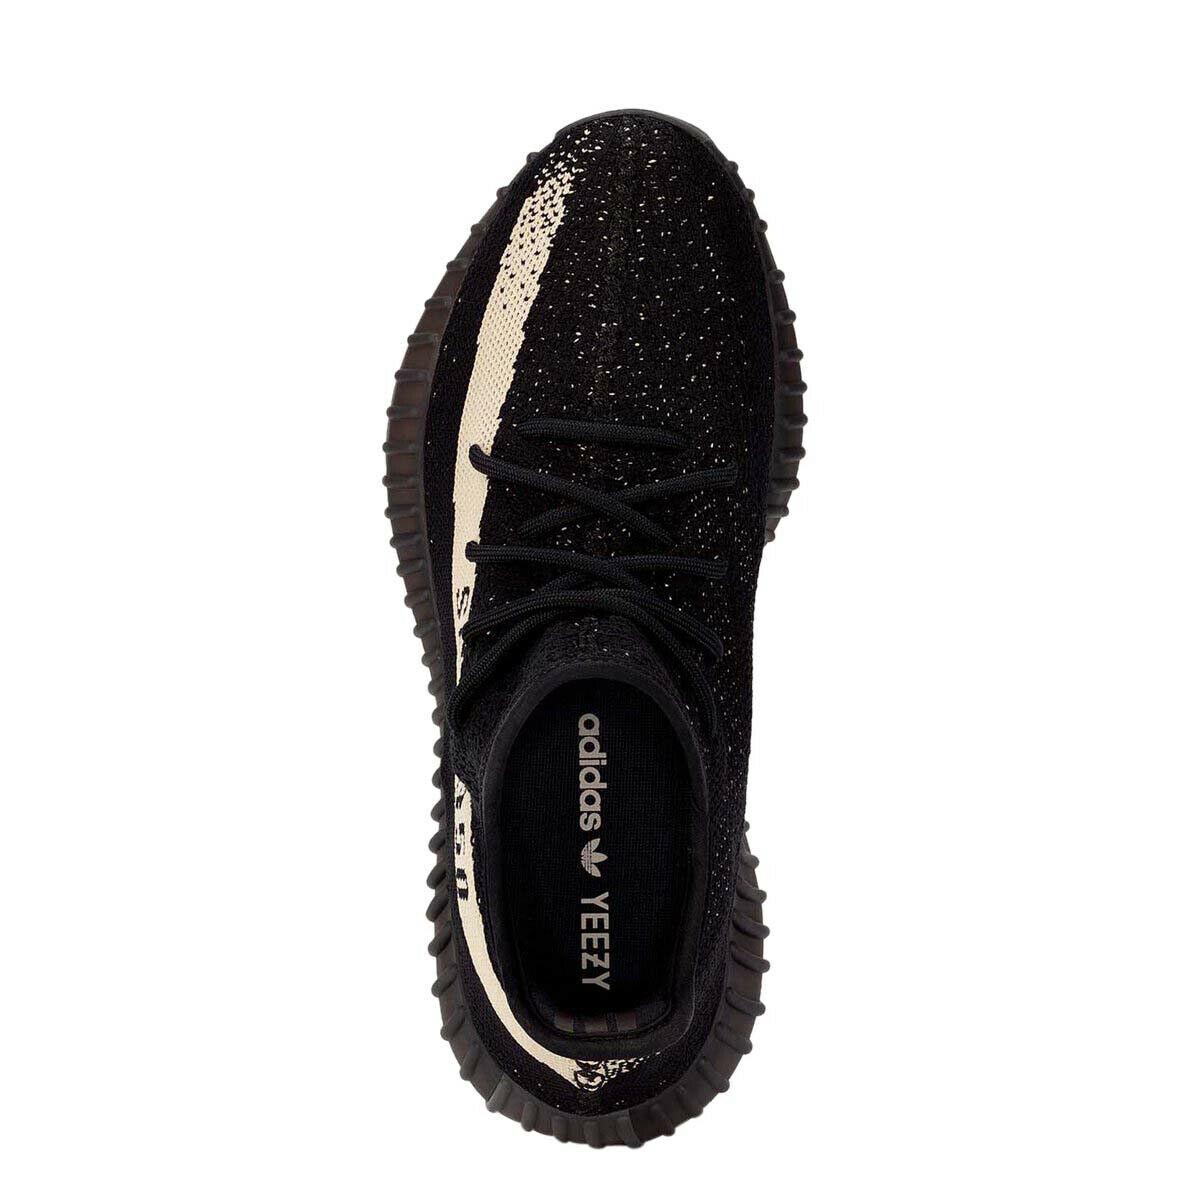 Adidas shoes Yeezy Boost - Black 2